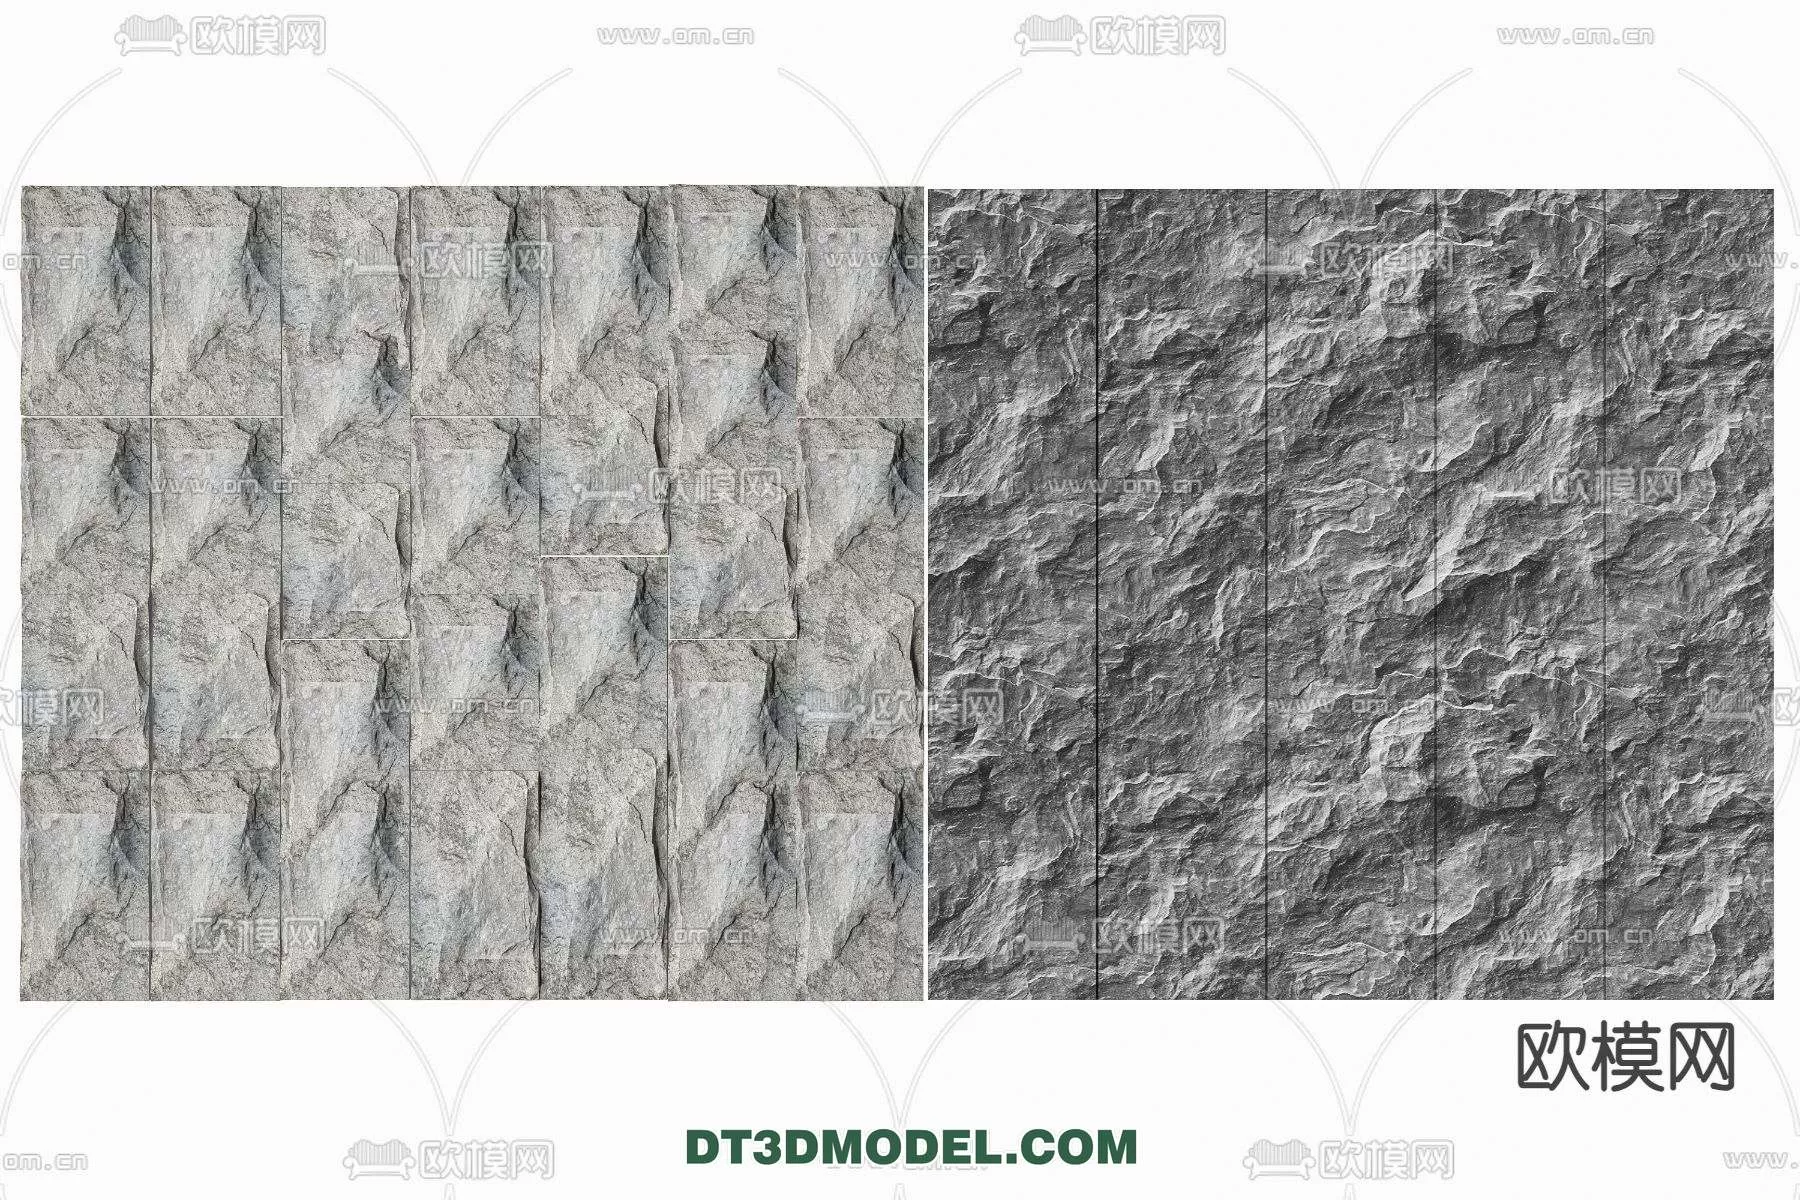 MATERIAL – TEXTURES – ROCK WALL – 0064